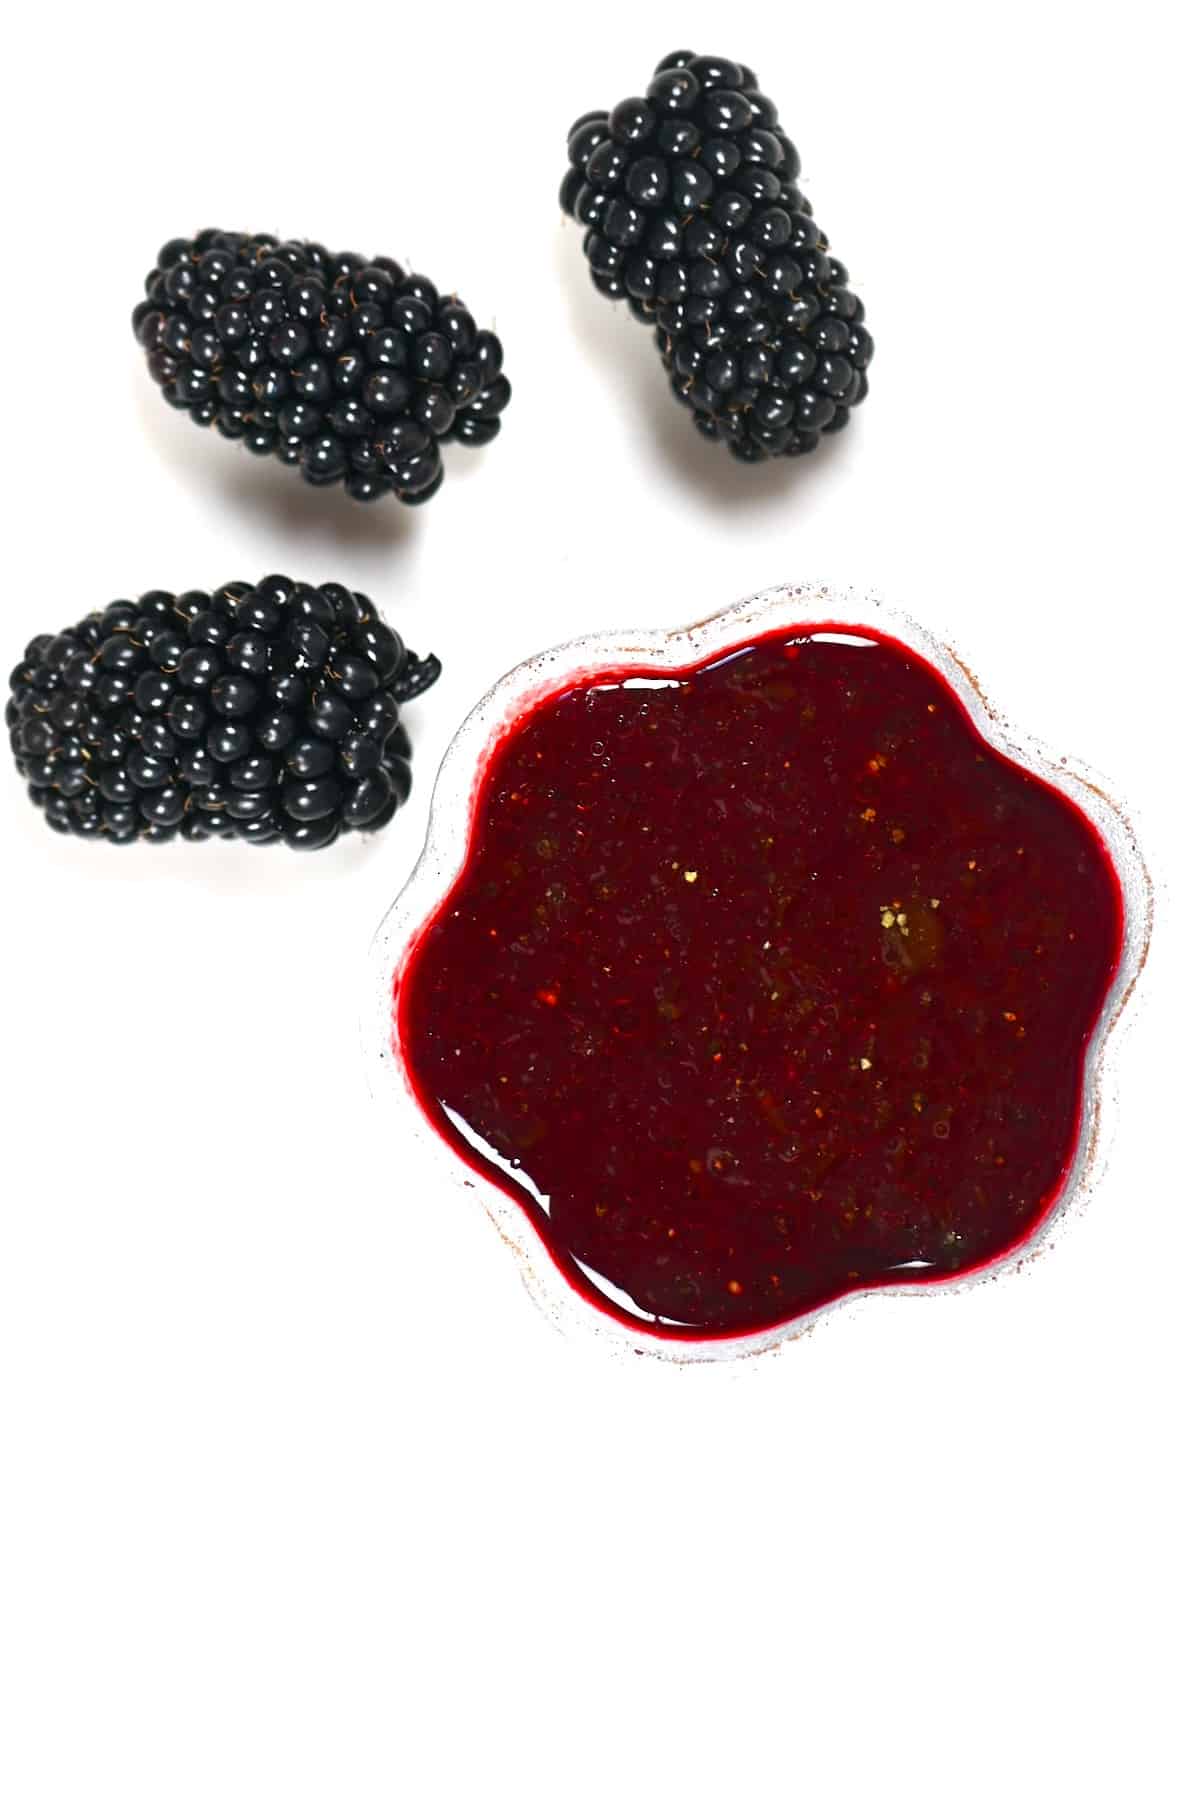 A small bowl with blackberry salad dressing